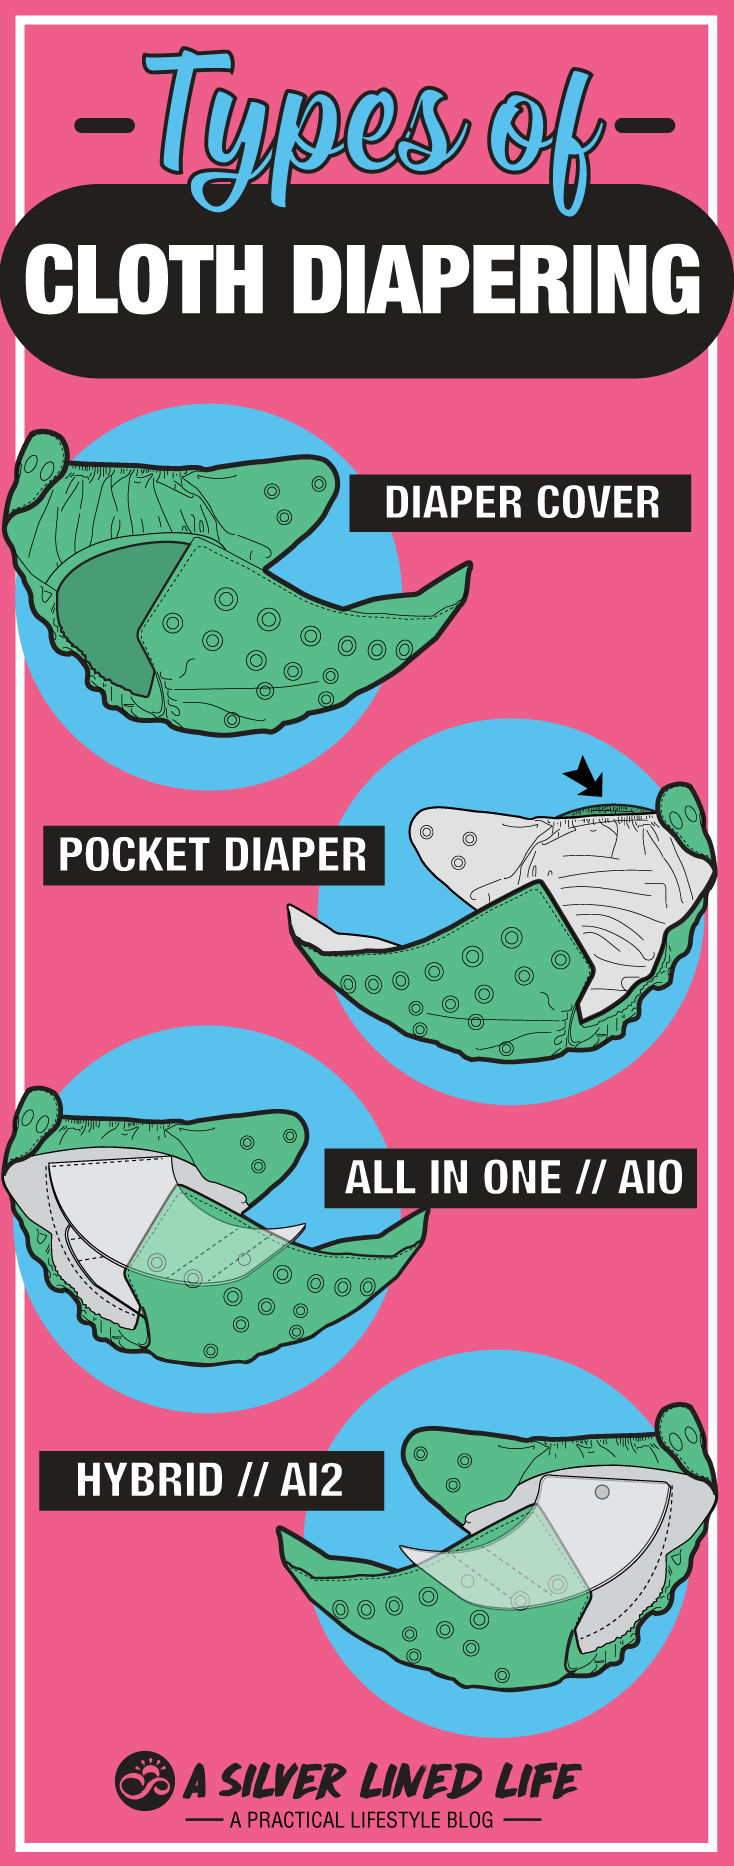 cloth diapers for dummies